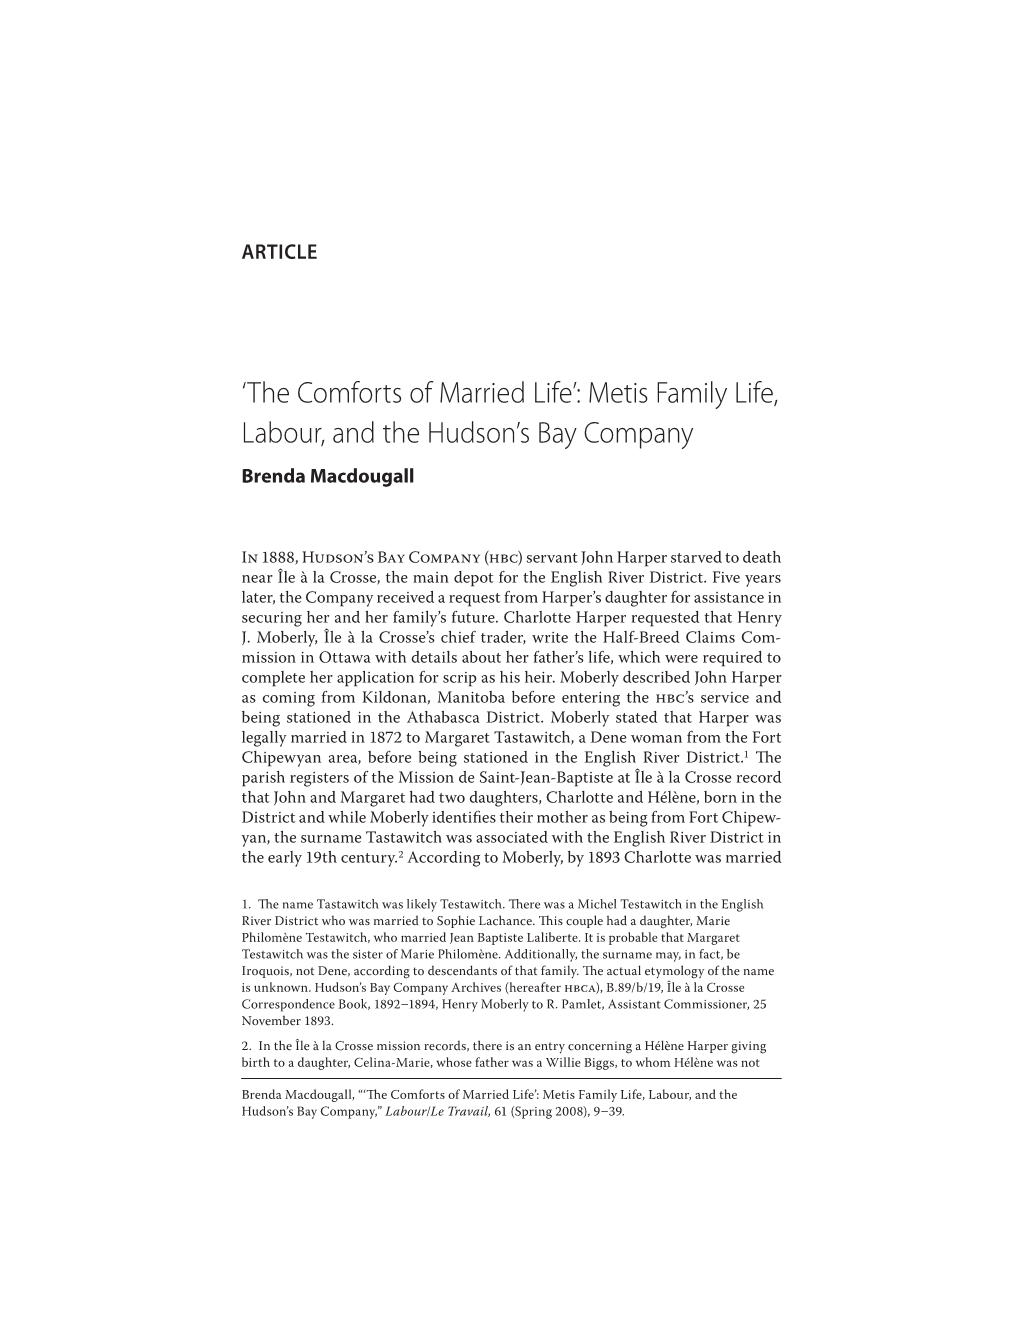 Metis Family Life, Labour, and the Hudson's Bay Company